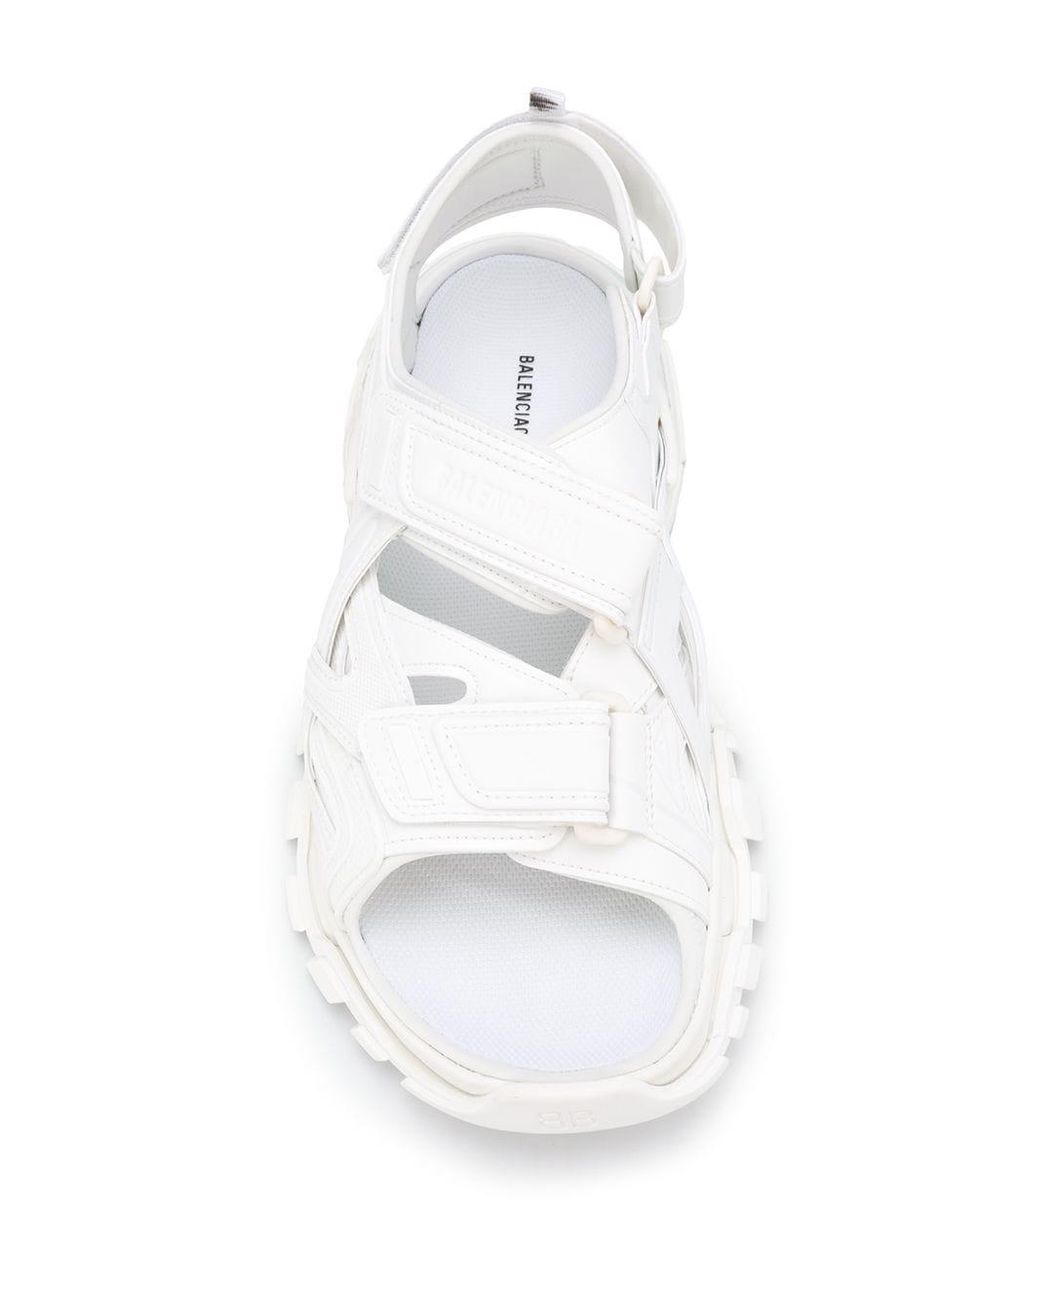 Balenciaga Synthetic Track Sandals in White for Men - Save 12 